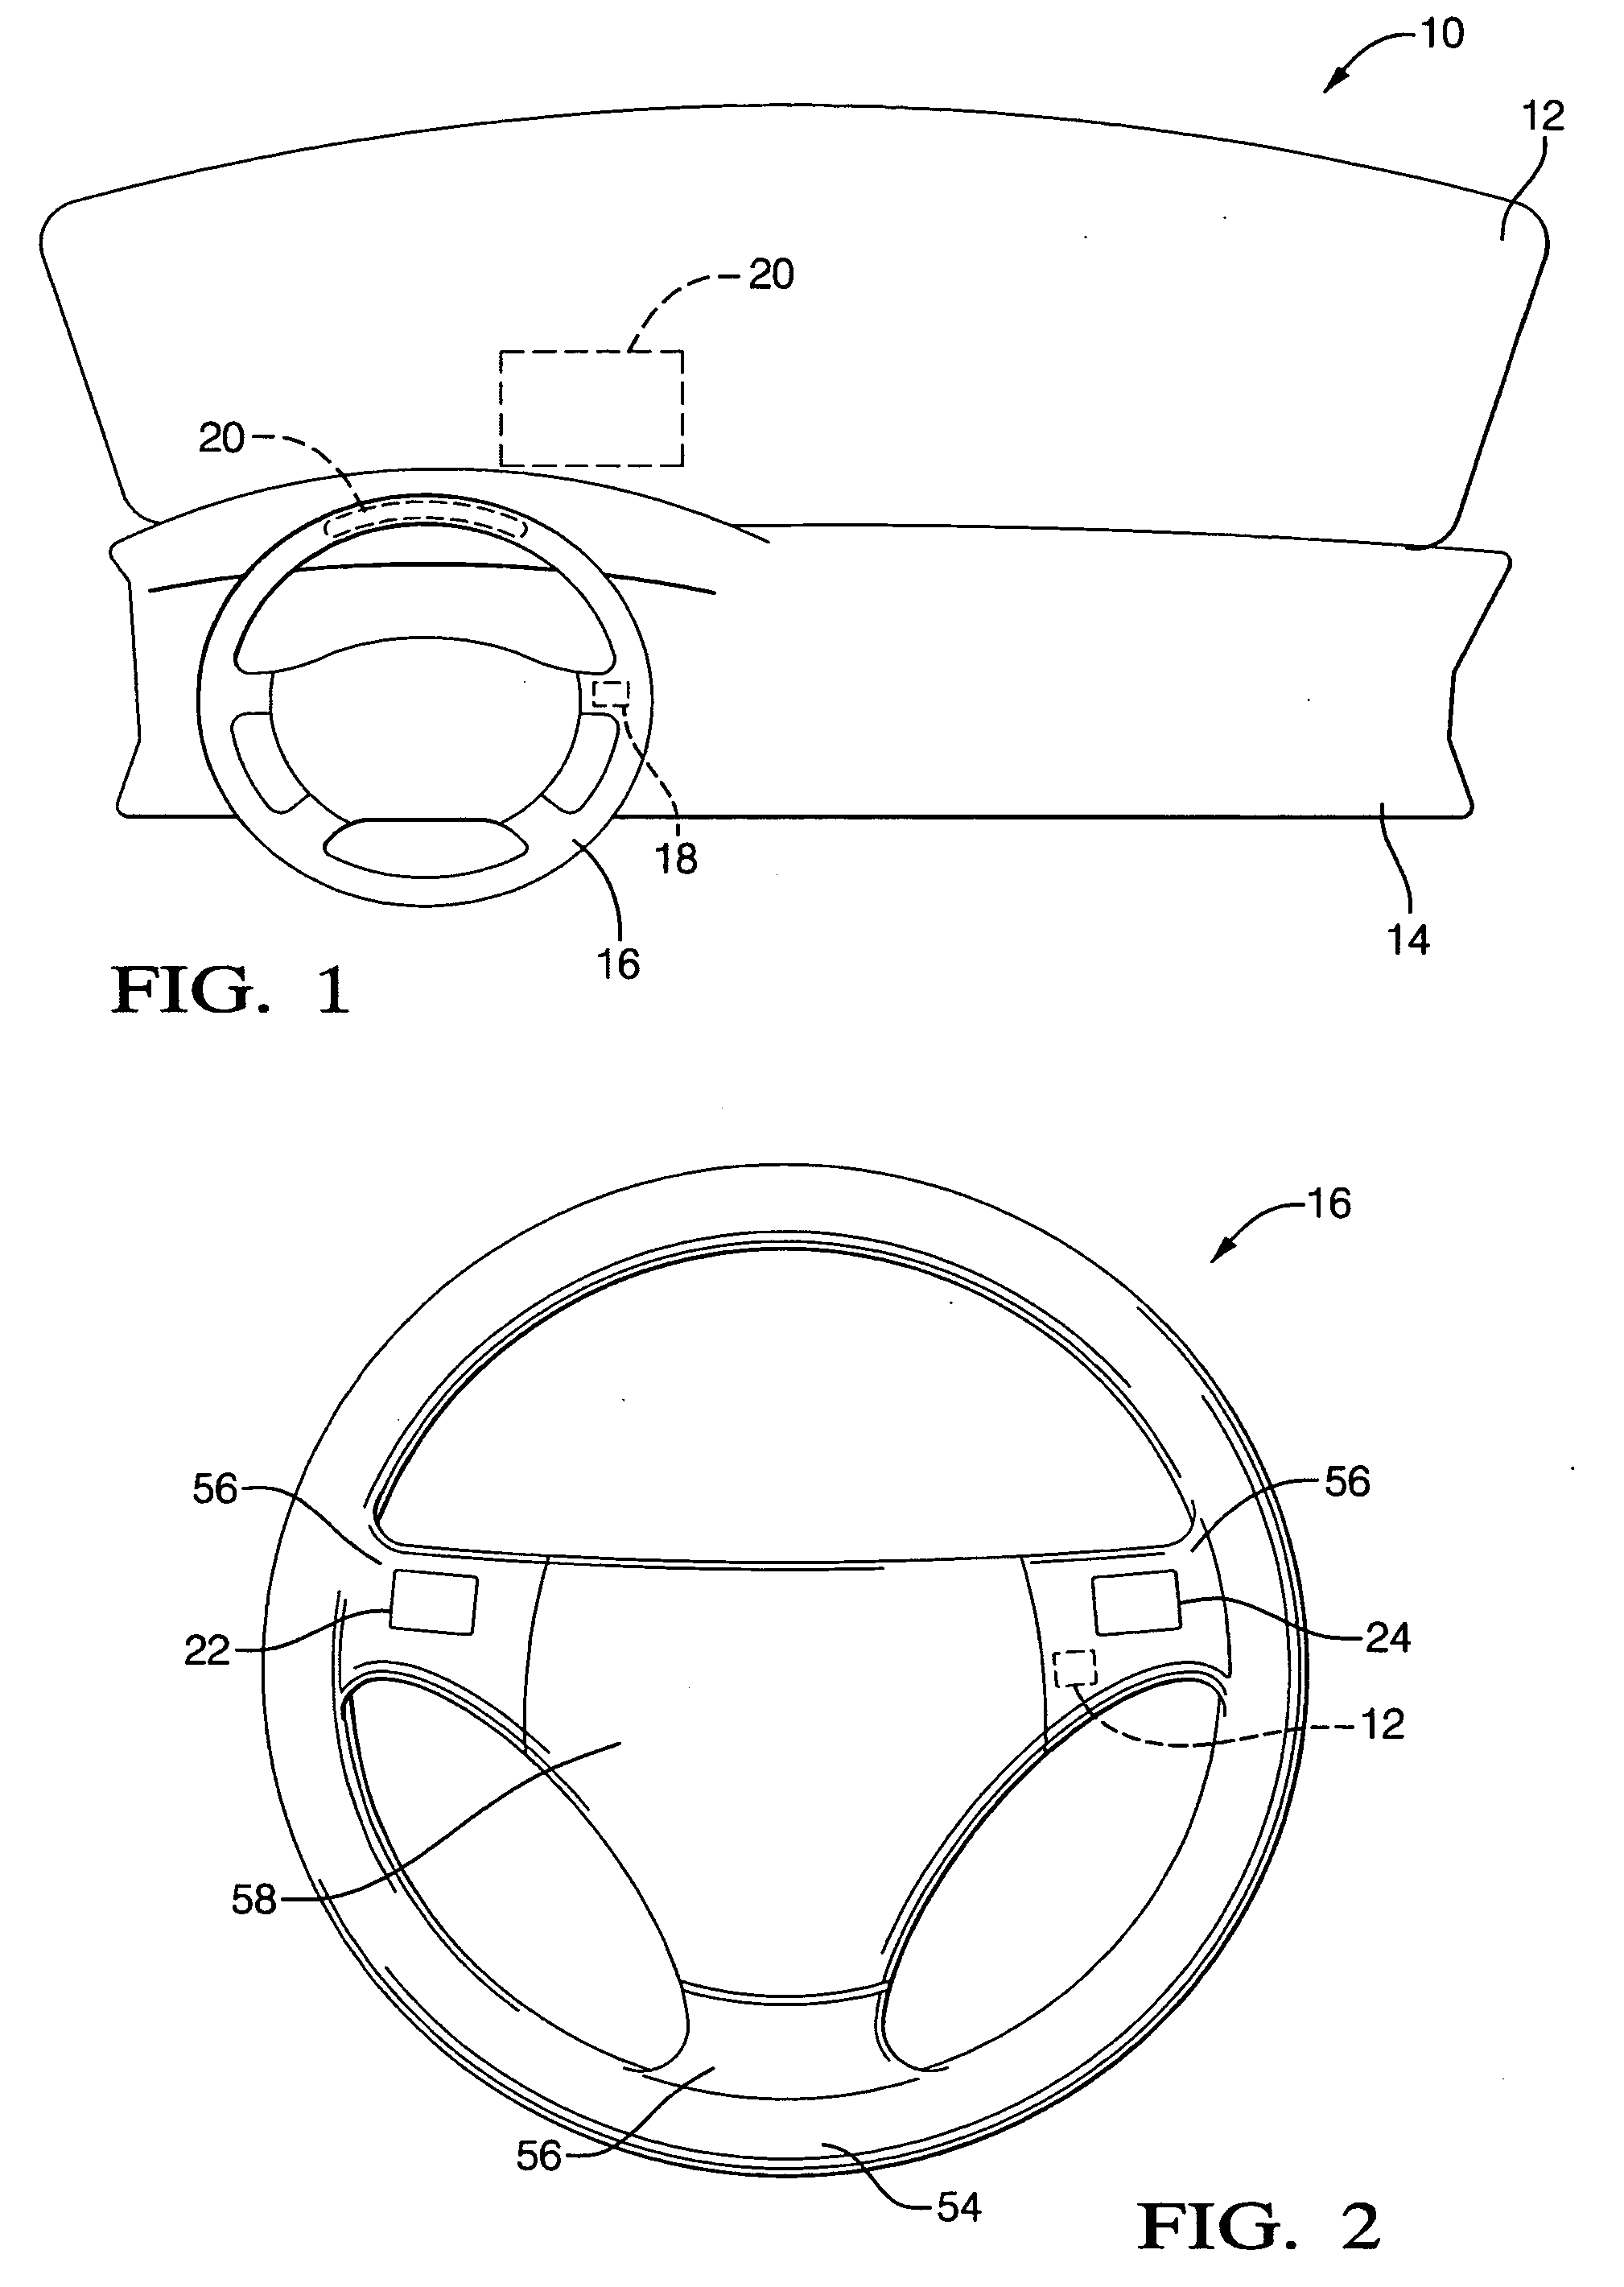 Method and apparatus for accessing vehicle systems